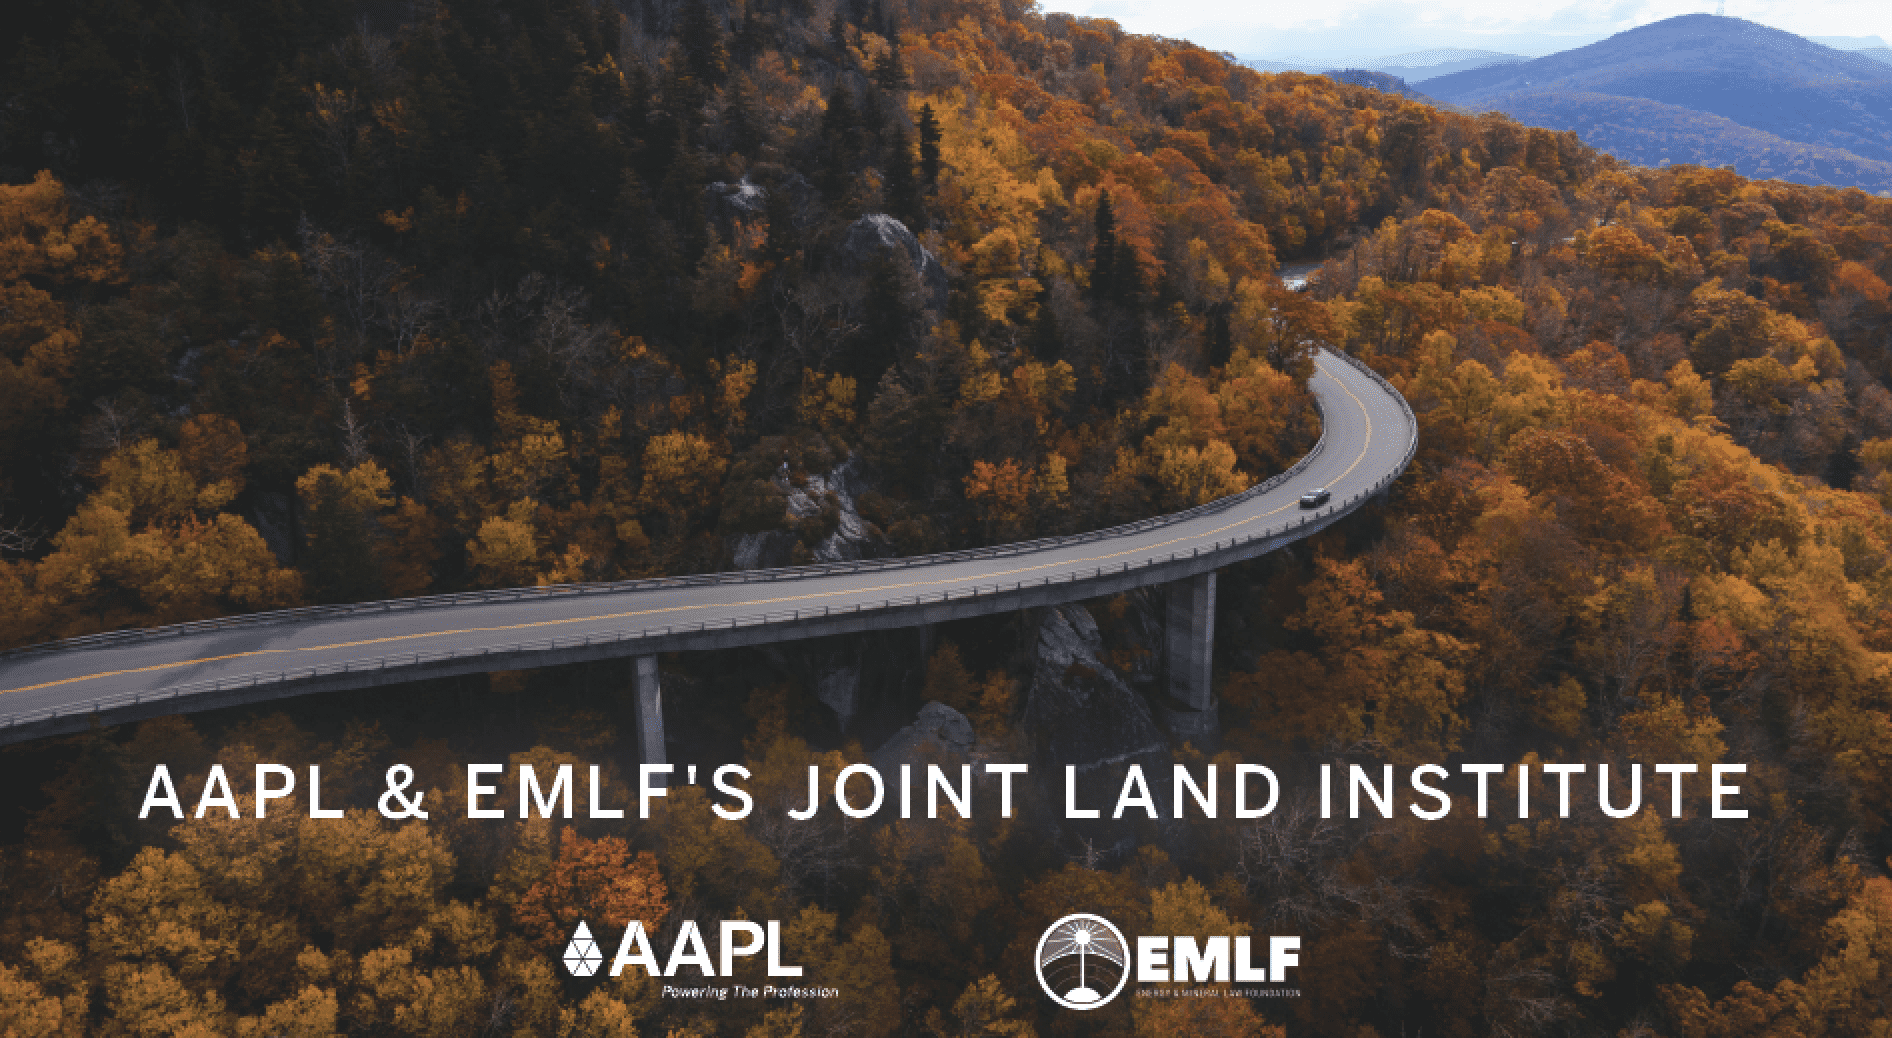 Hotel and Event Registration Now Open for the AAPL & EMLF Joint Land Institute